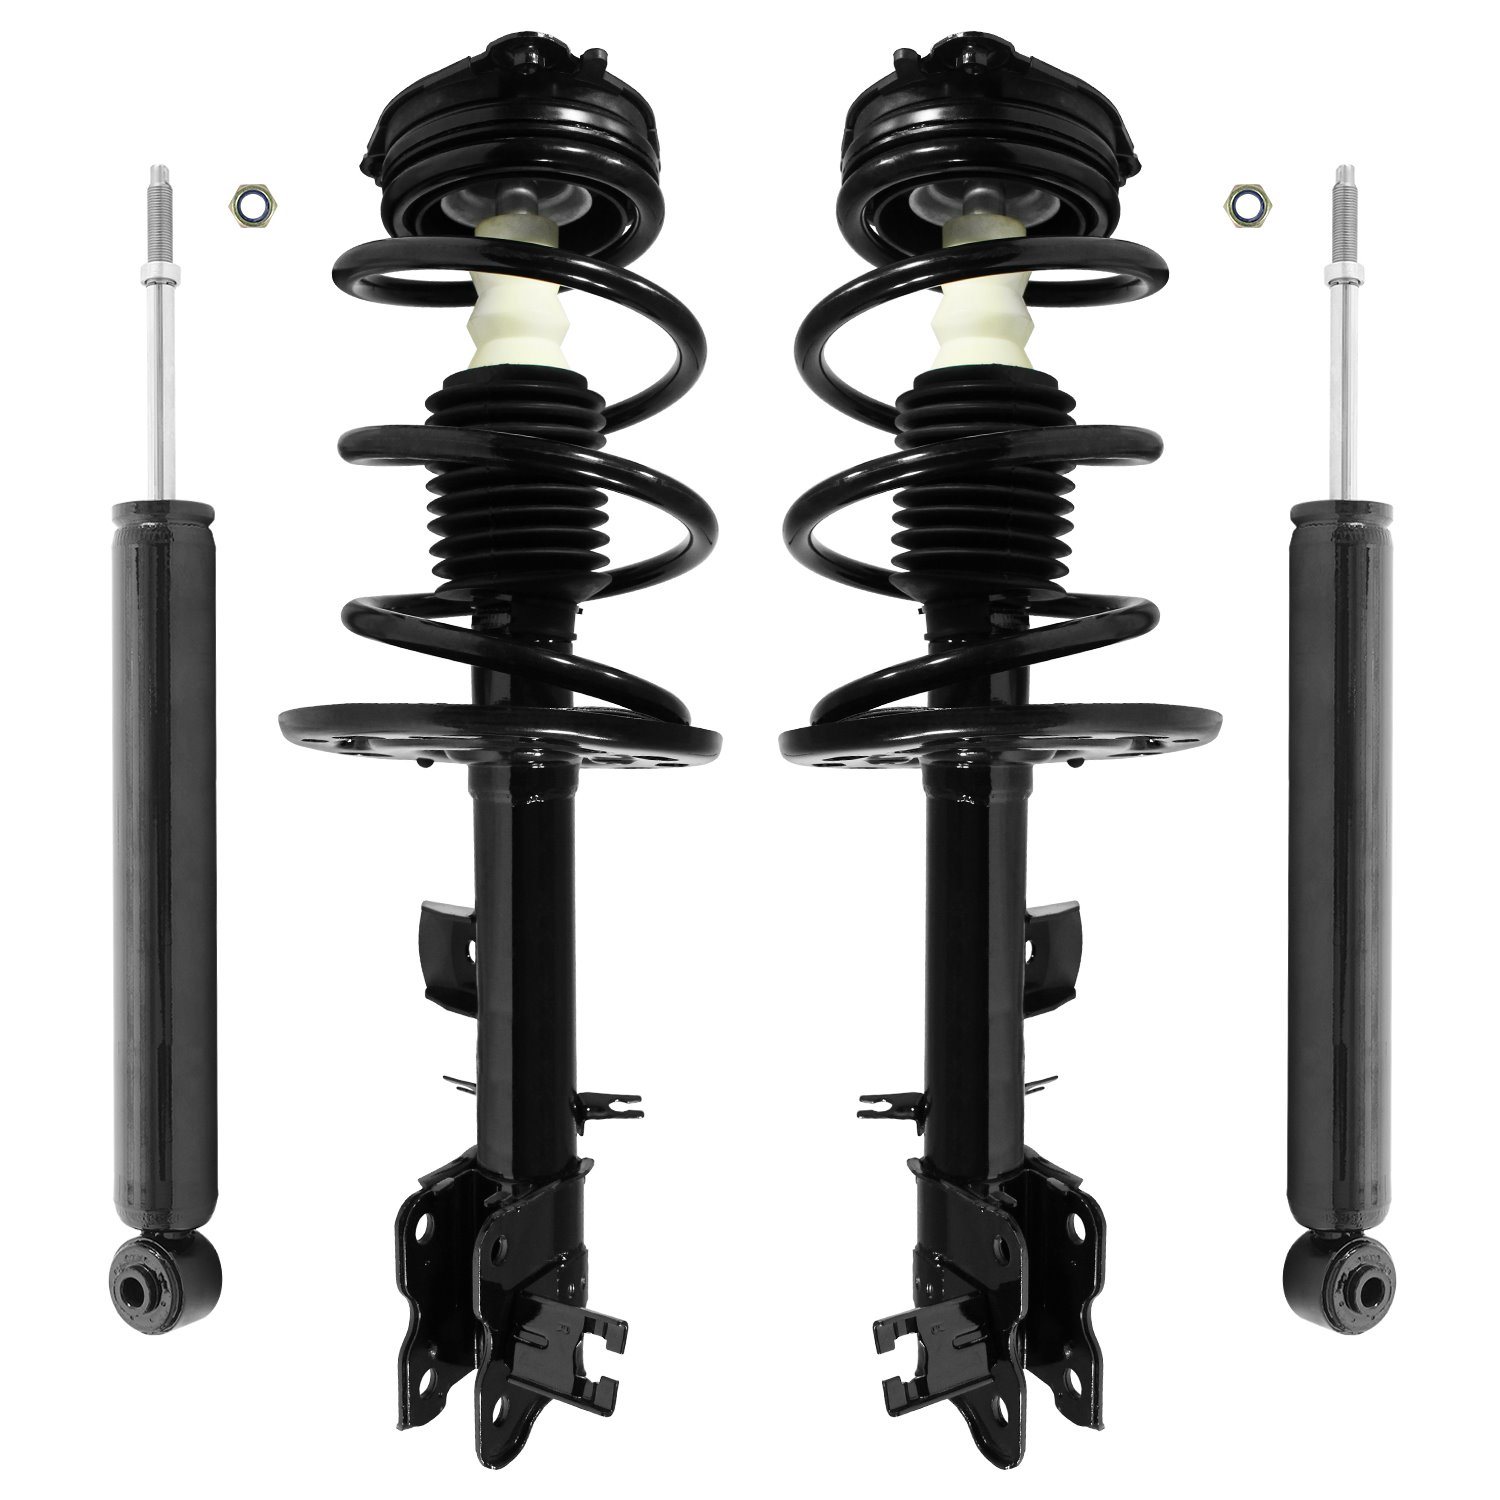 4-11763-253620-001 Front & Rear Suspension Strut & Coil Spring Assembly Fits Select Nissan Murano